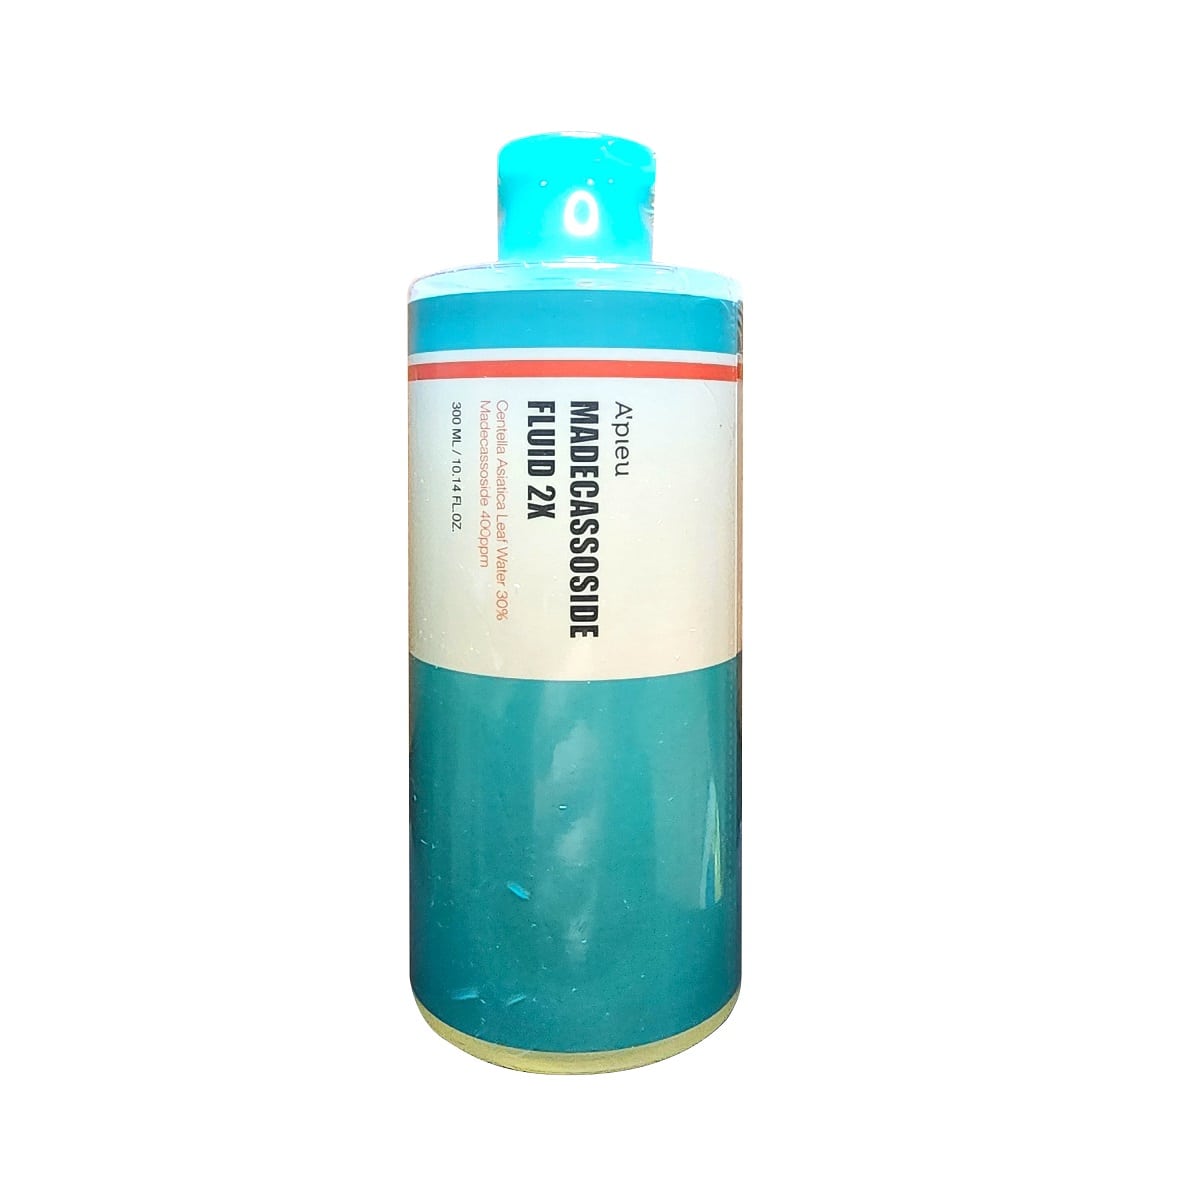 Product label for A'pieu Madecassoside Fluid 2X (300 mL)